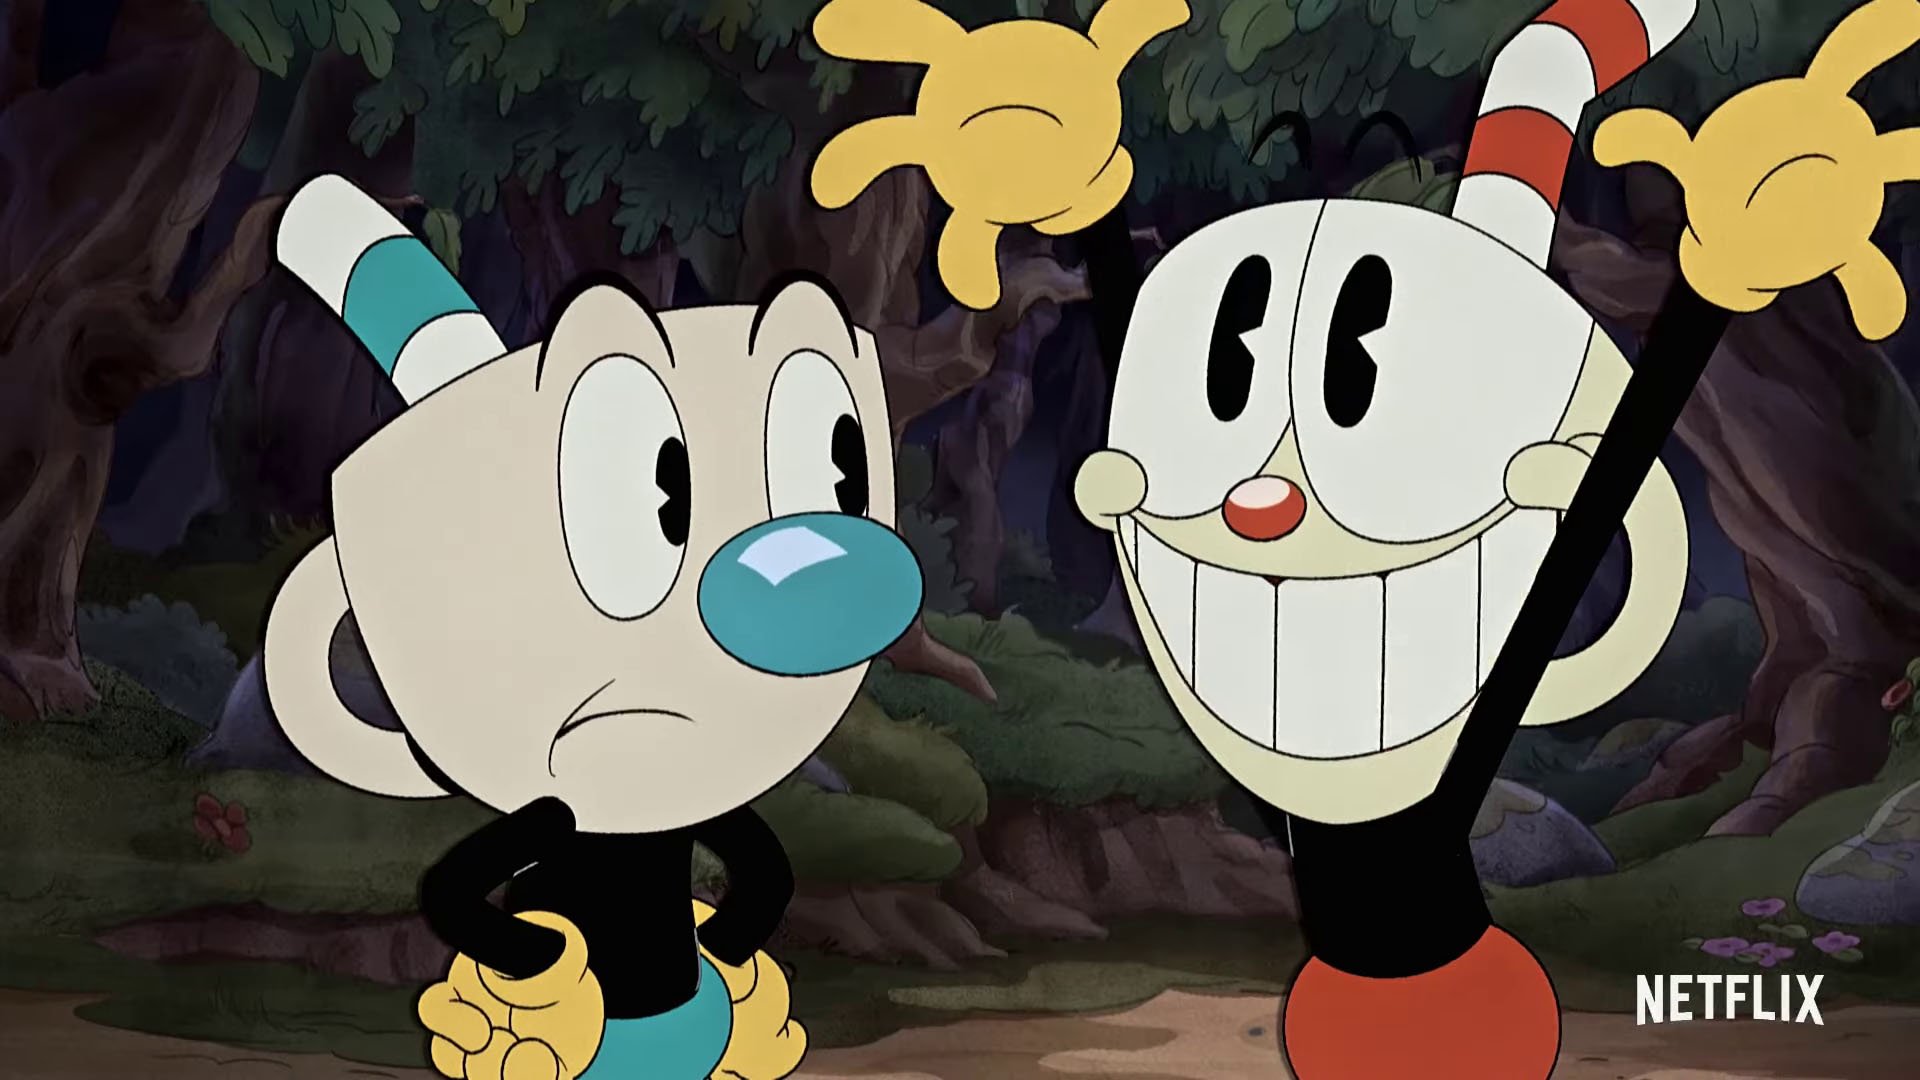 When Does The Cuphead Show Season 2 Come Out on Netflix?